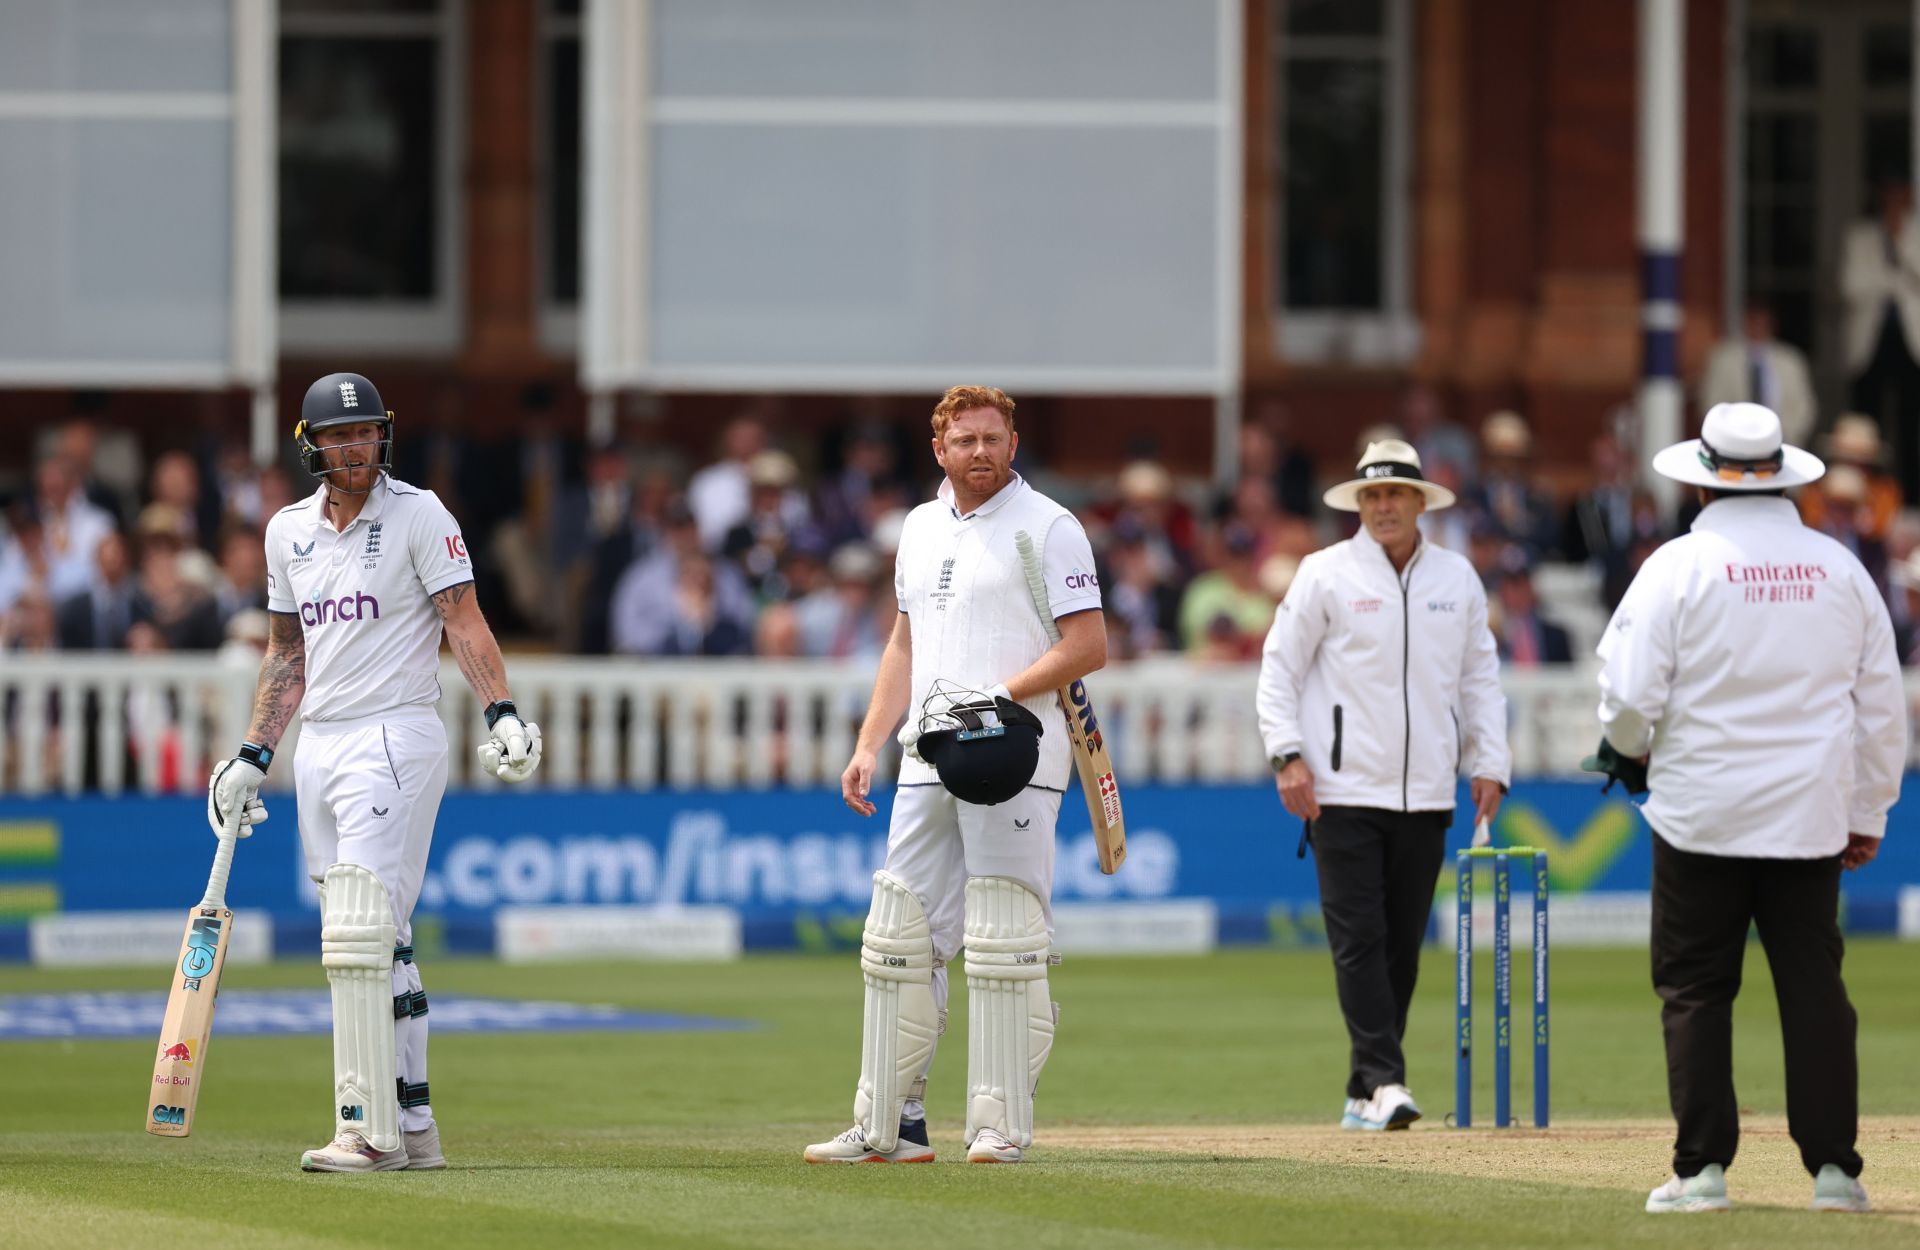 Jonny Bairstow after being dismissed on Day 5 at Lord&rsquo;s. (Pic: Getty Images)